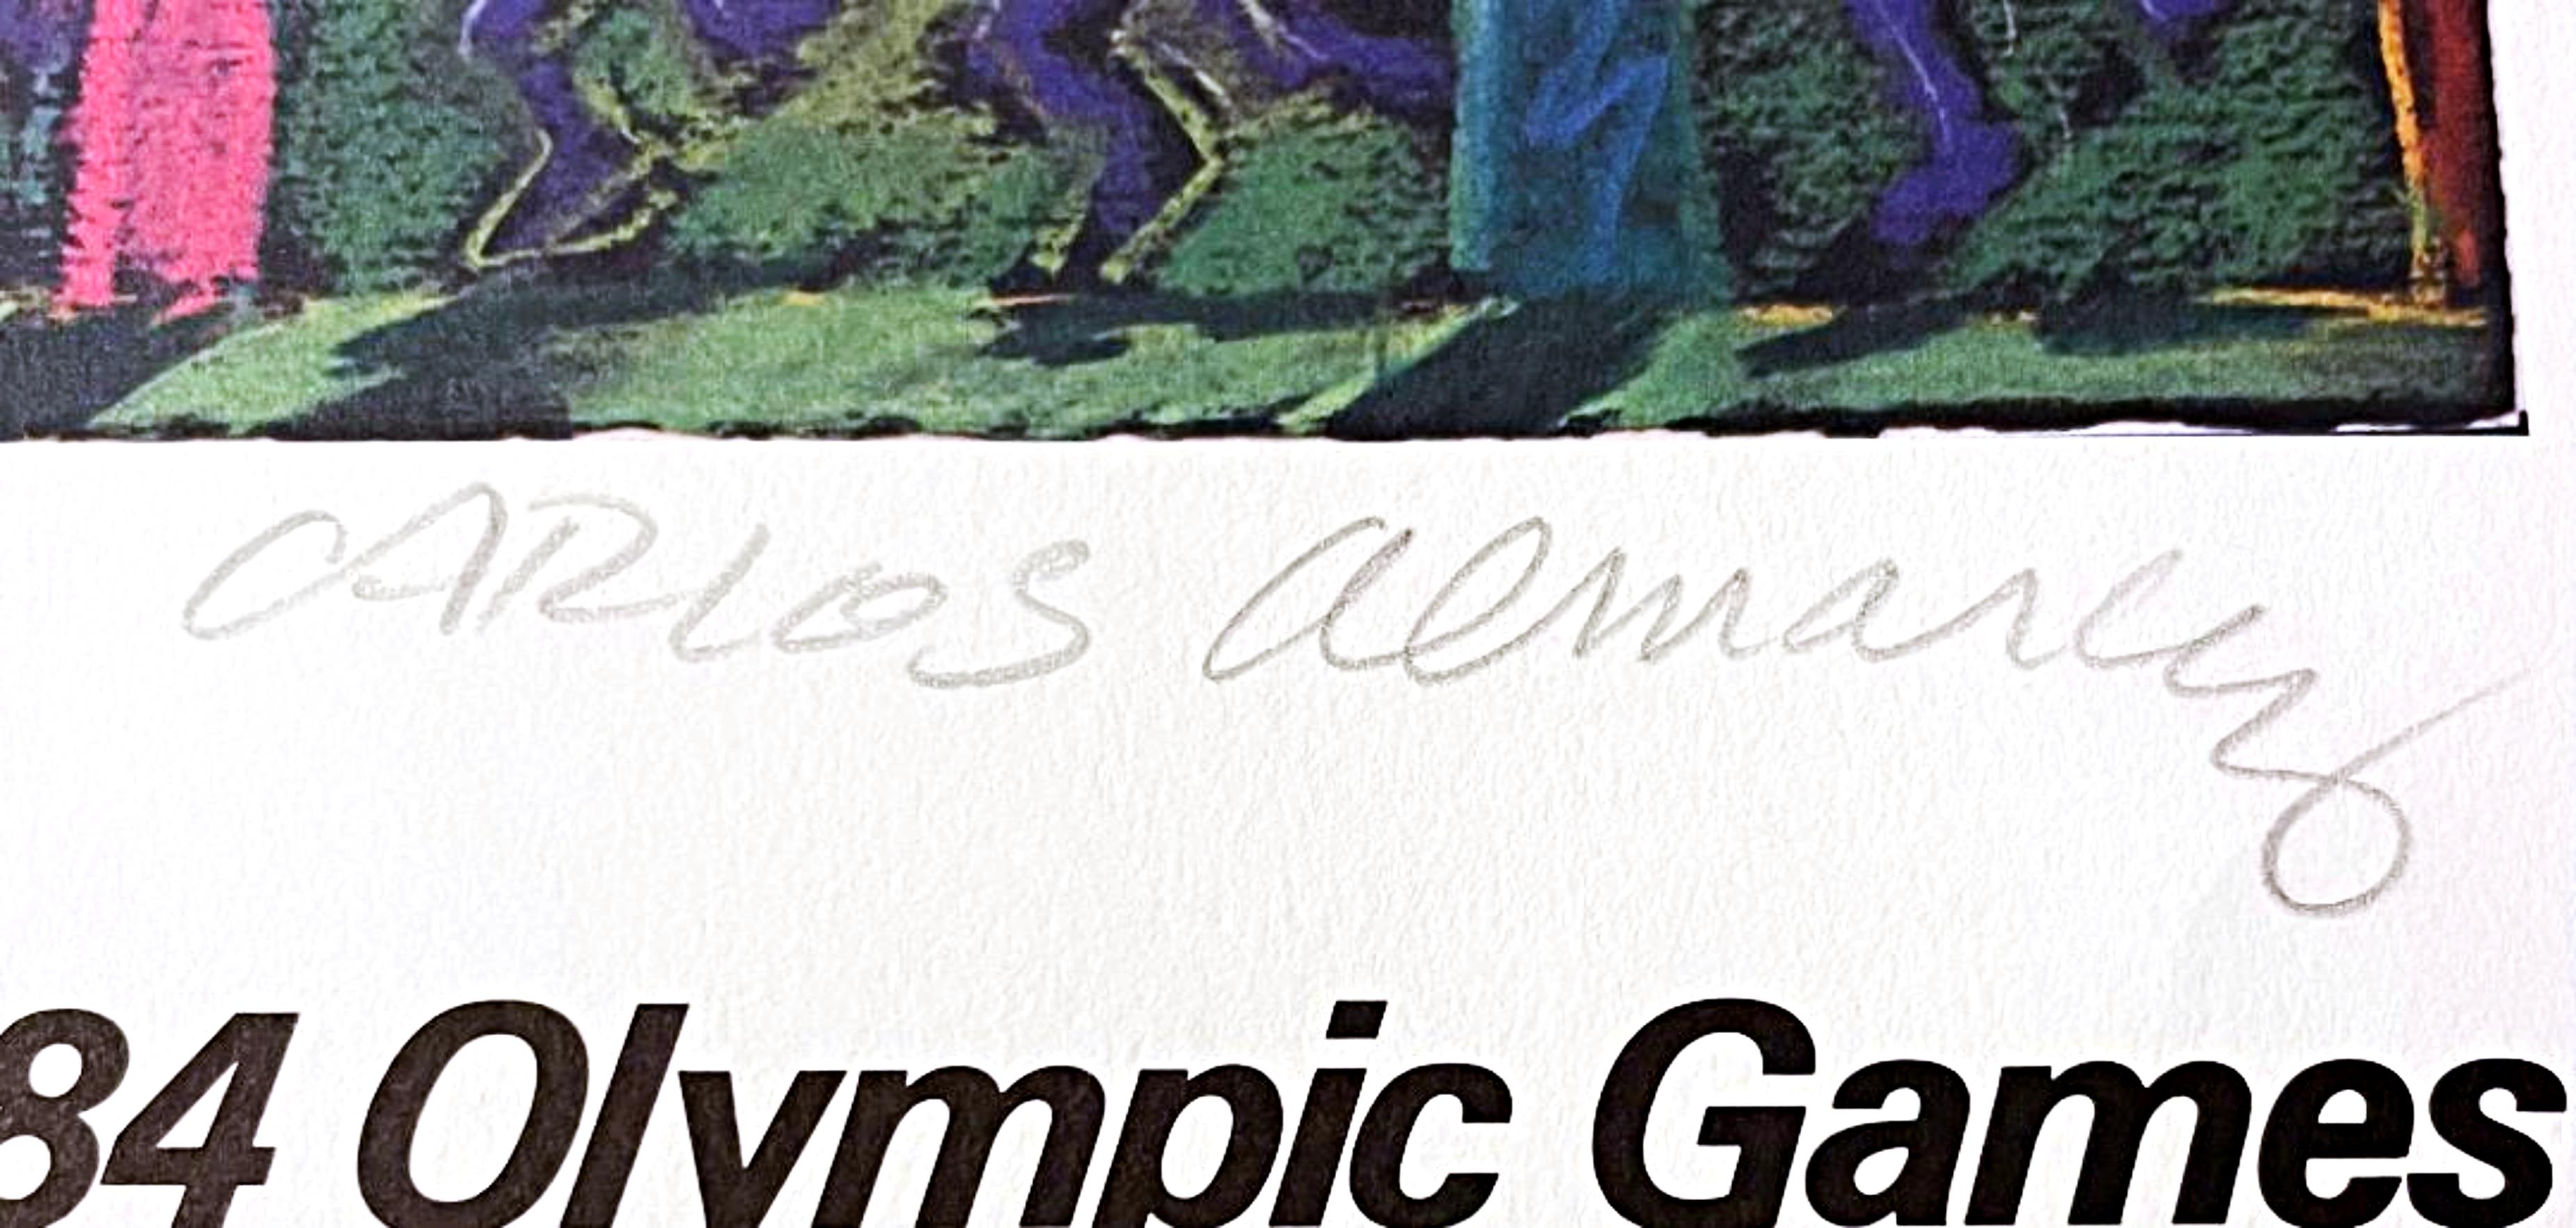 Carlos Almaraz
Los Angeles 1984 Olympic Games (with COA from Olympic Committee), 1982
Offset Lithograph on Parson's Diploma paper, accompanied by COA from Olympic Committee.
Signed in graphite pencil on the front. Accompanied by a letter of